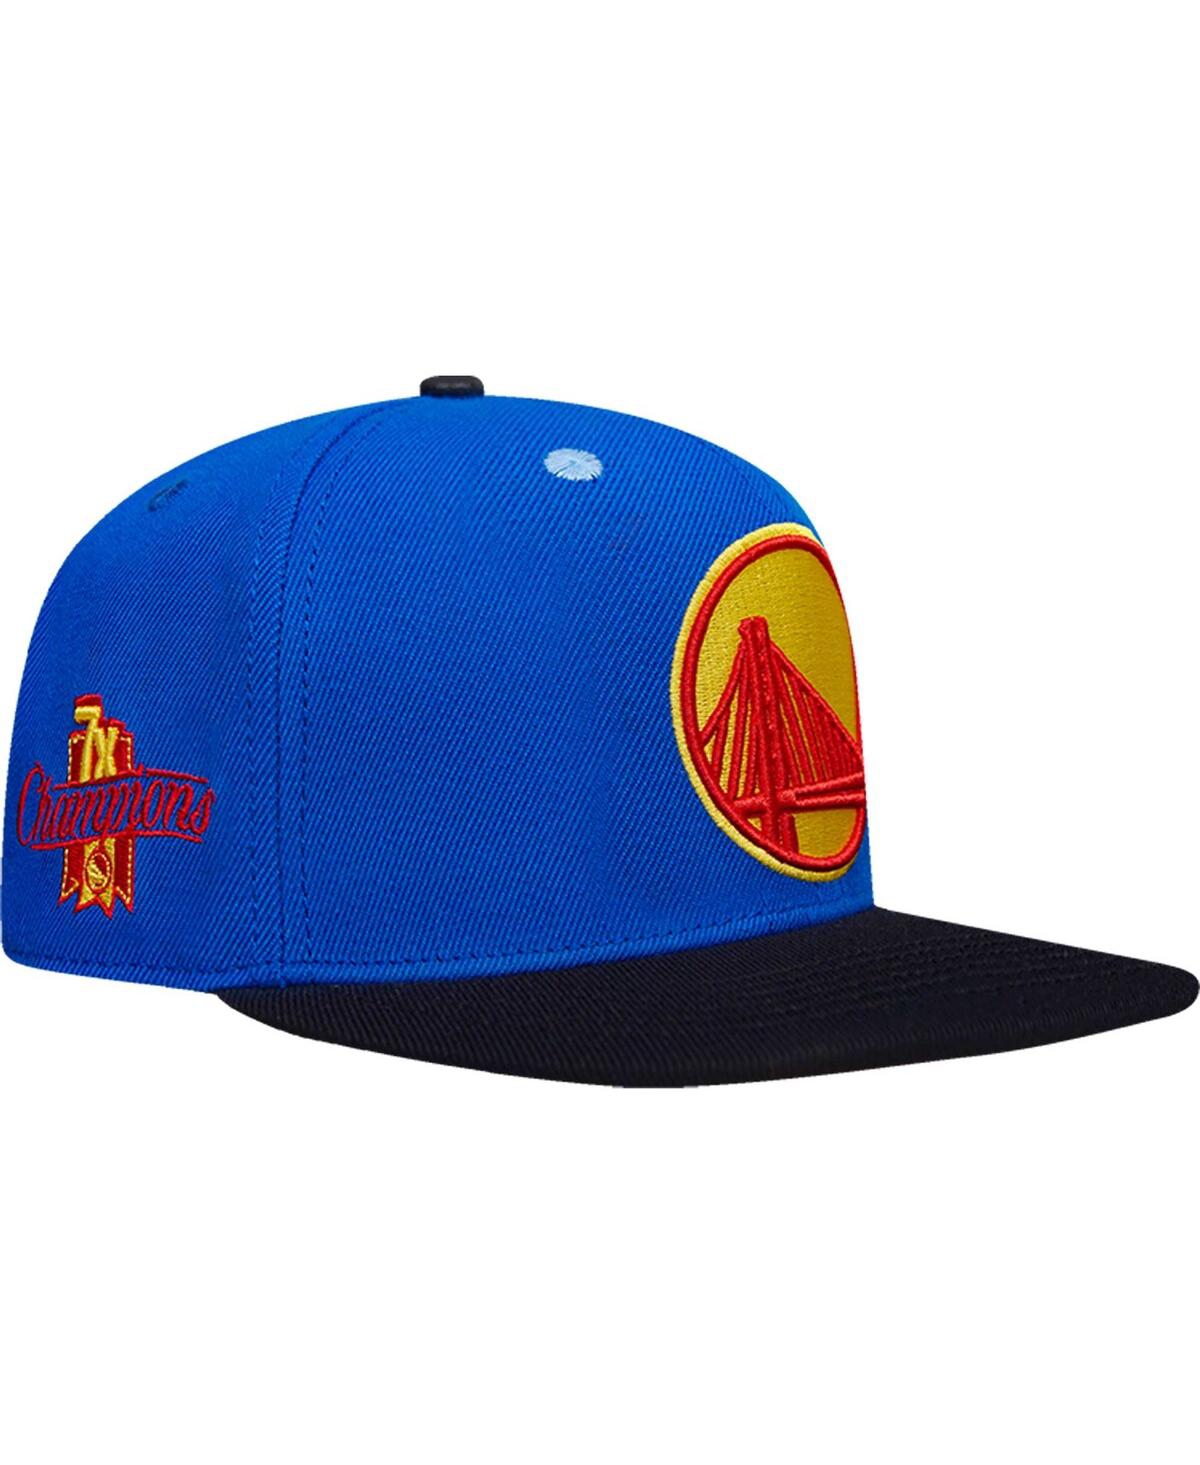 Shop Pro Standard Men's  Royal Golden State Warriors 7x Nba Finals Champions Any Condition Snapback Hat